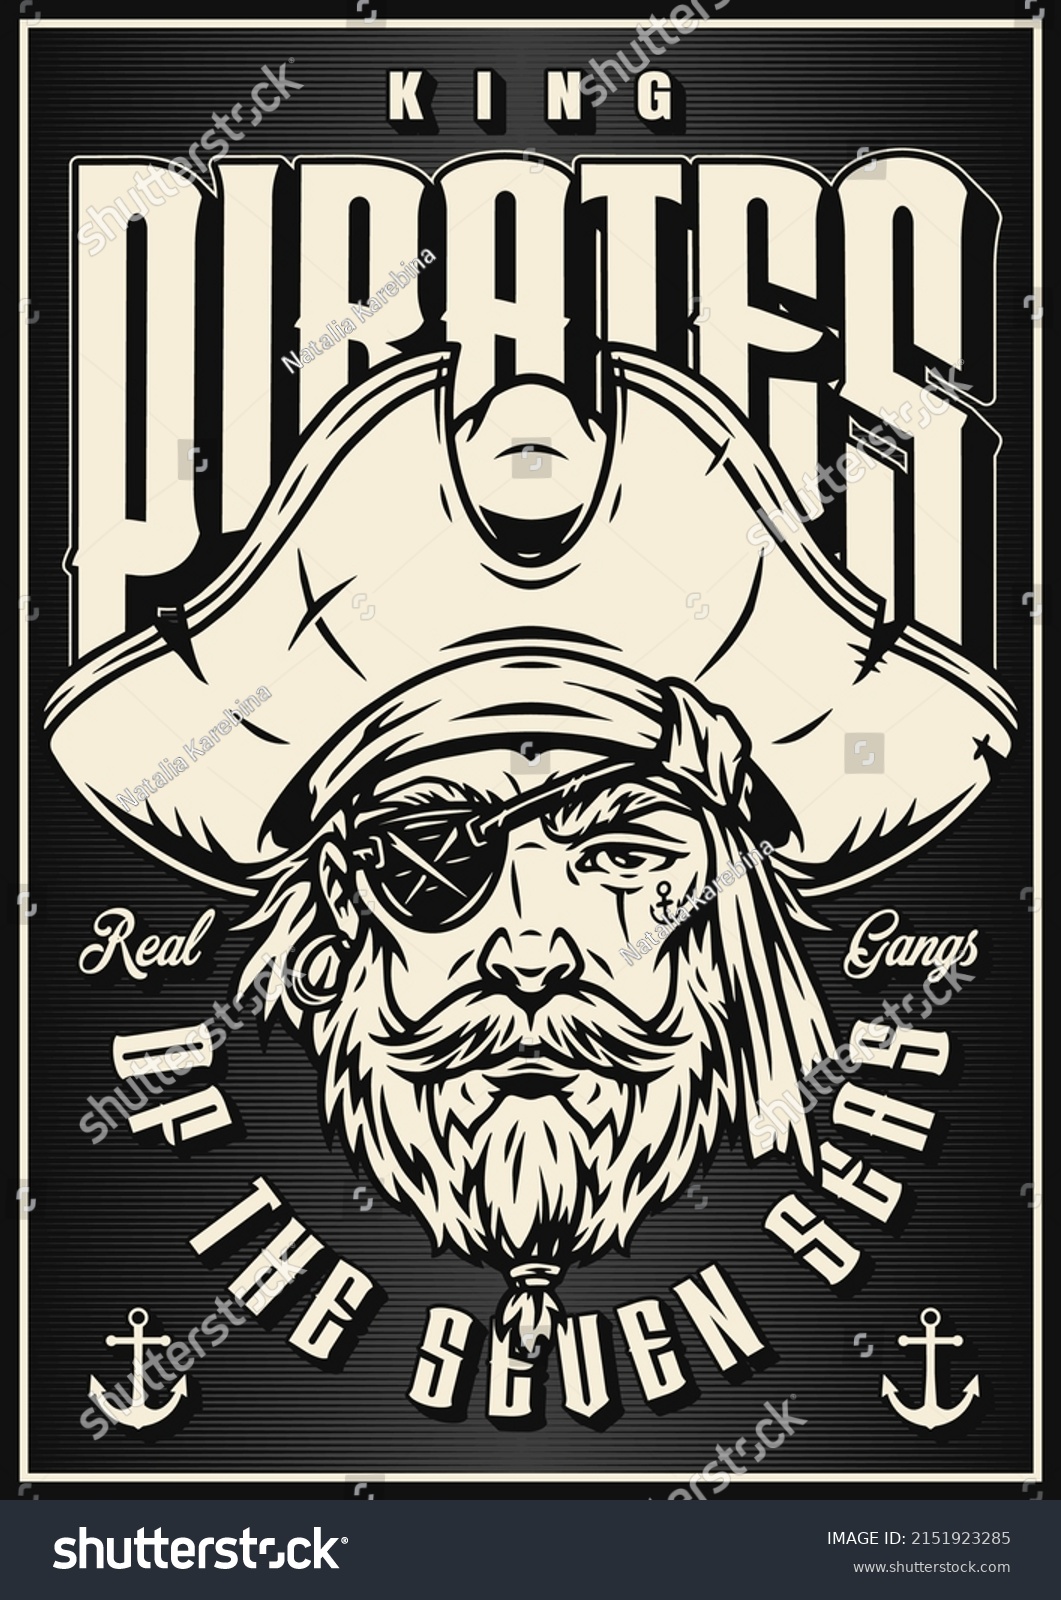 SVG of Monochrome poster with pirate face, wearing hat and eye patch marine illustration vector vintage style svg